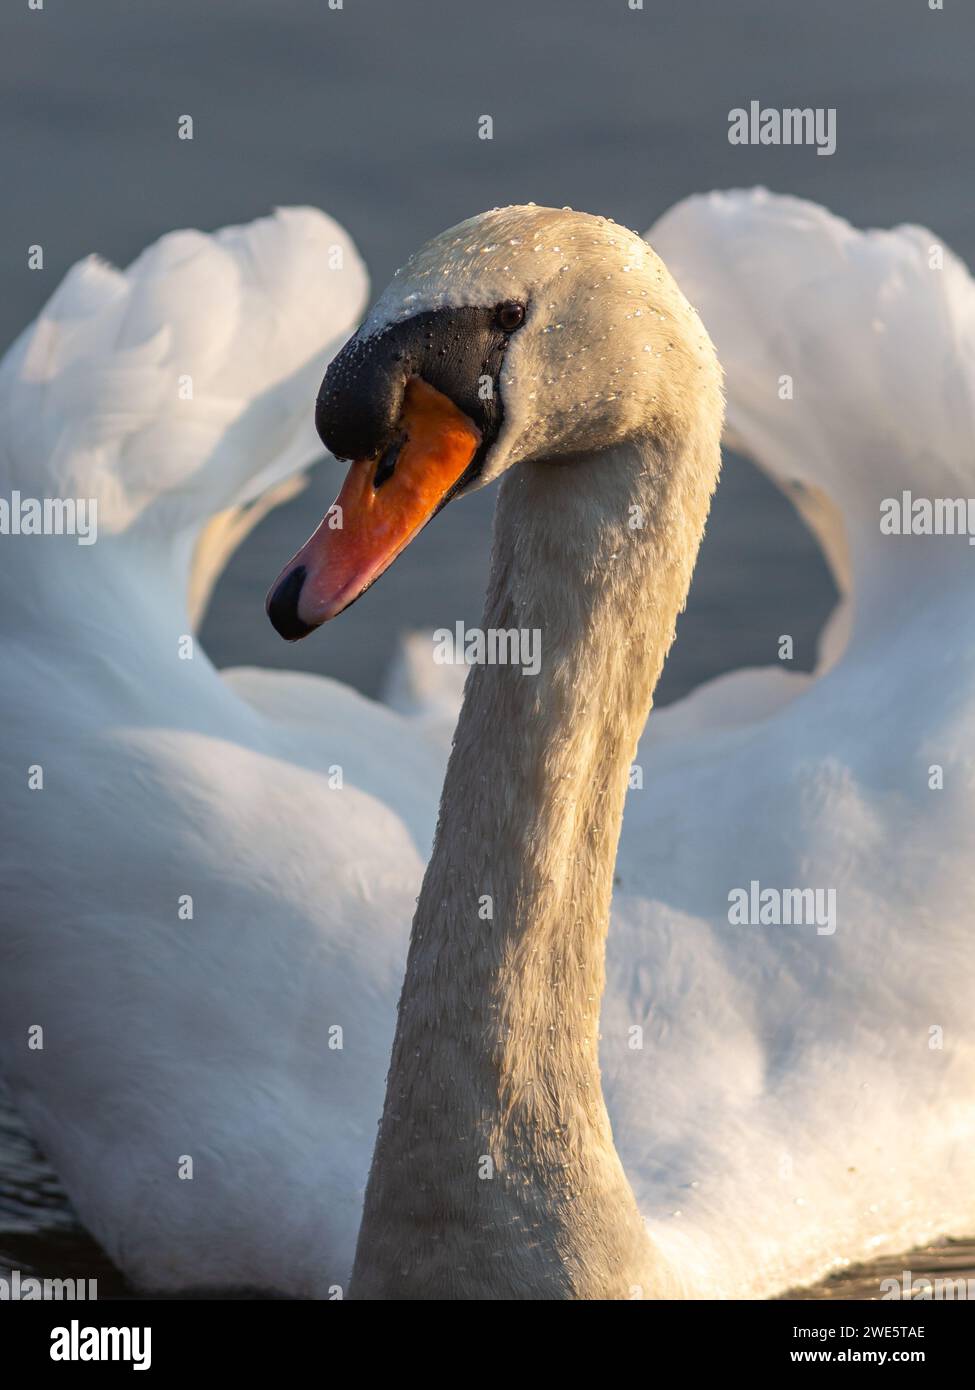 A Mute swan in medium close-up, its head turned sideways and framed between arched wings up looking at the camera Stock Photo